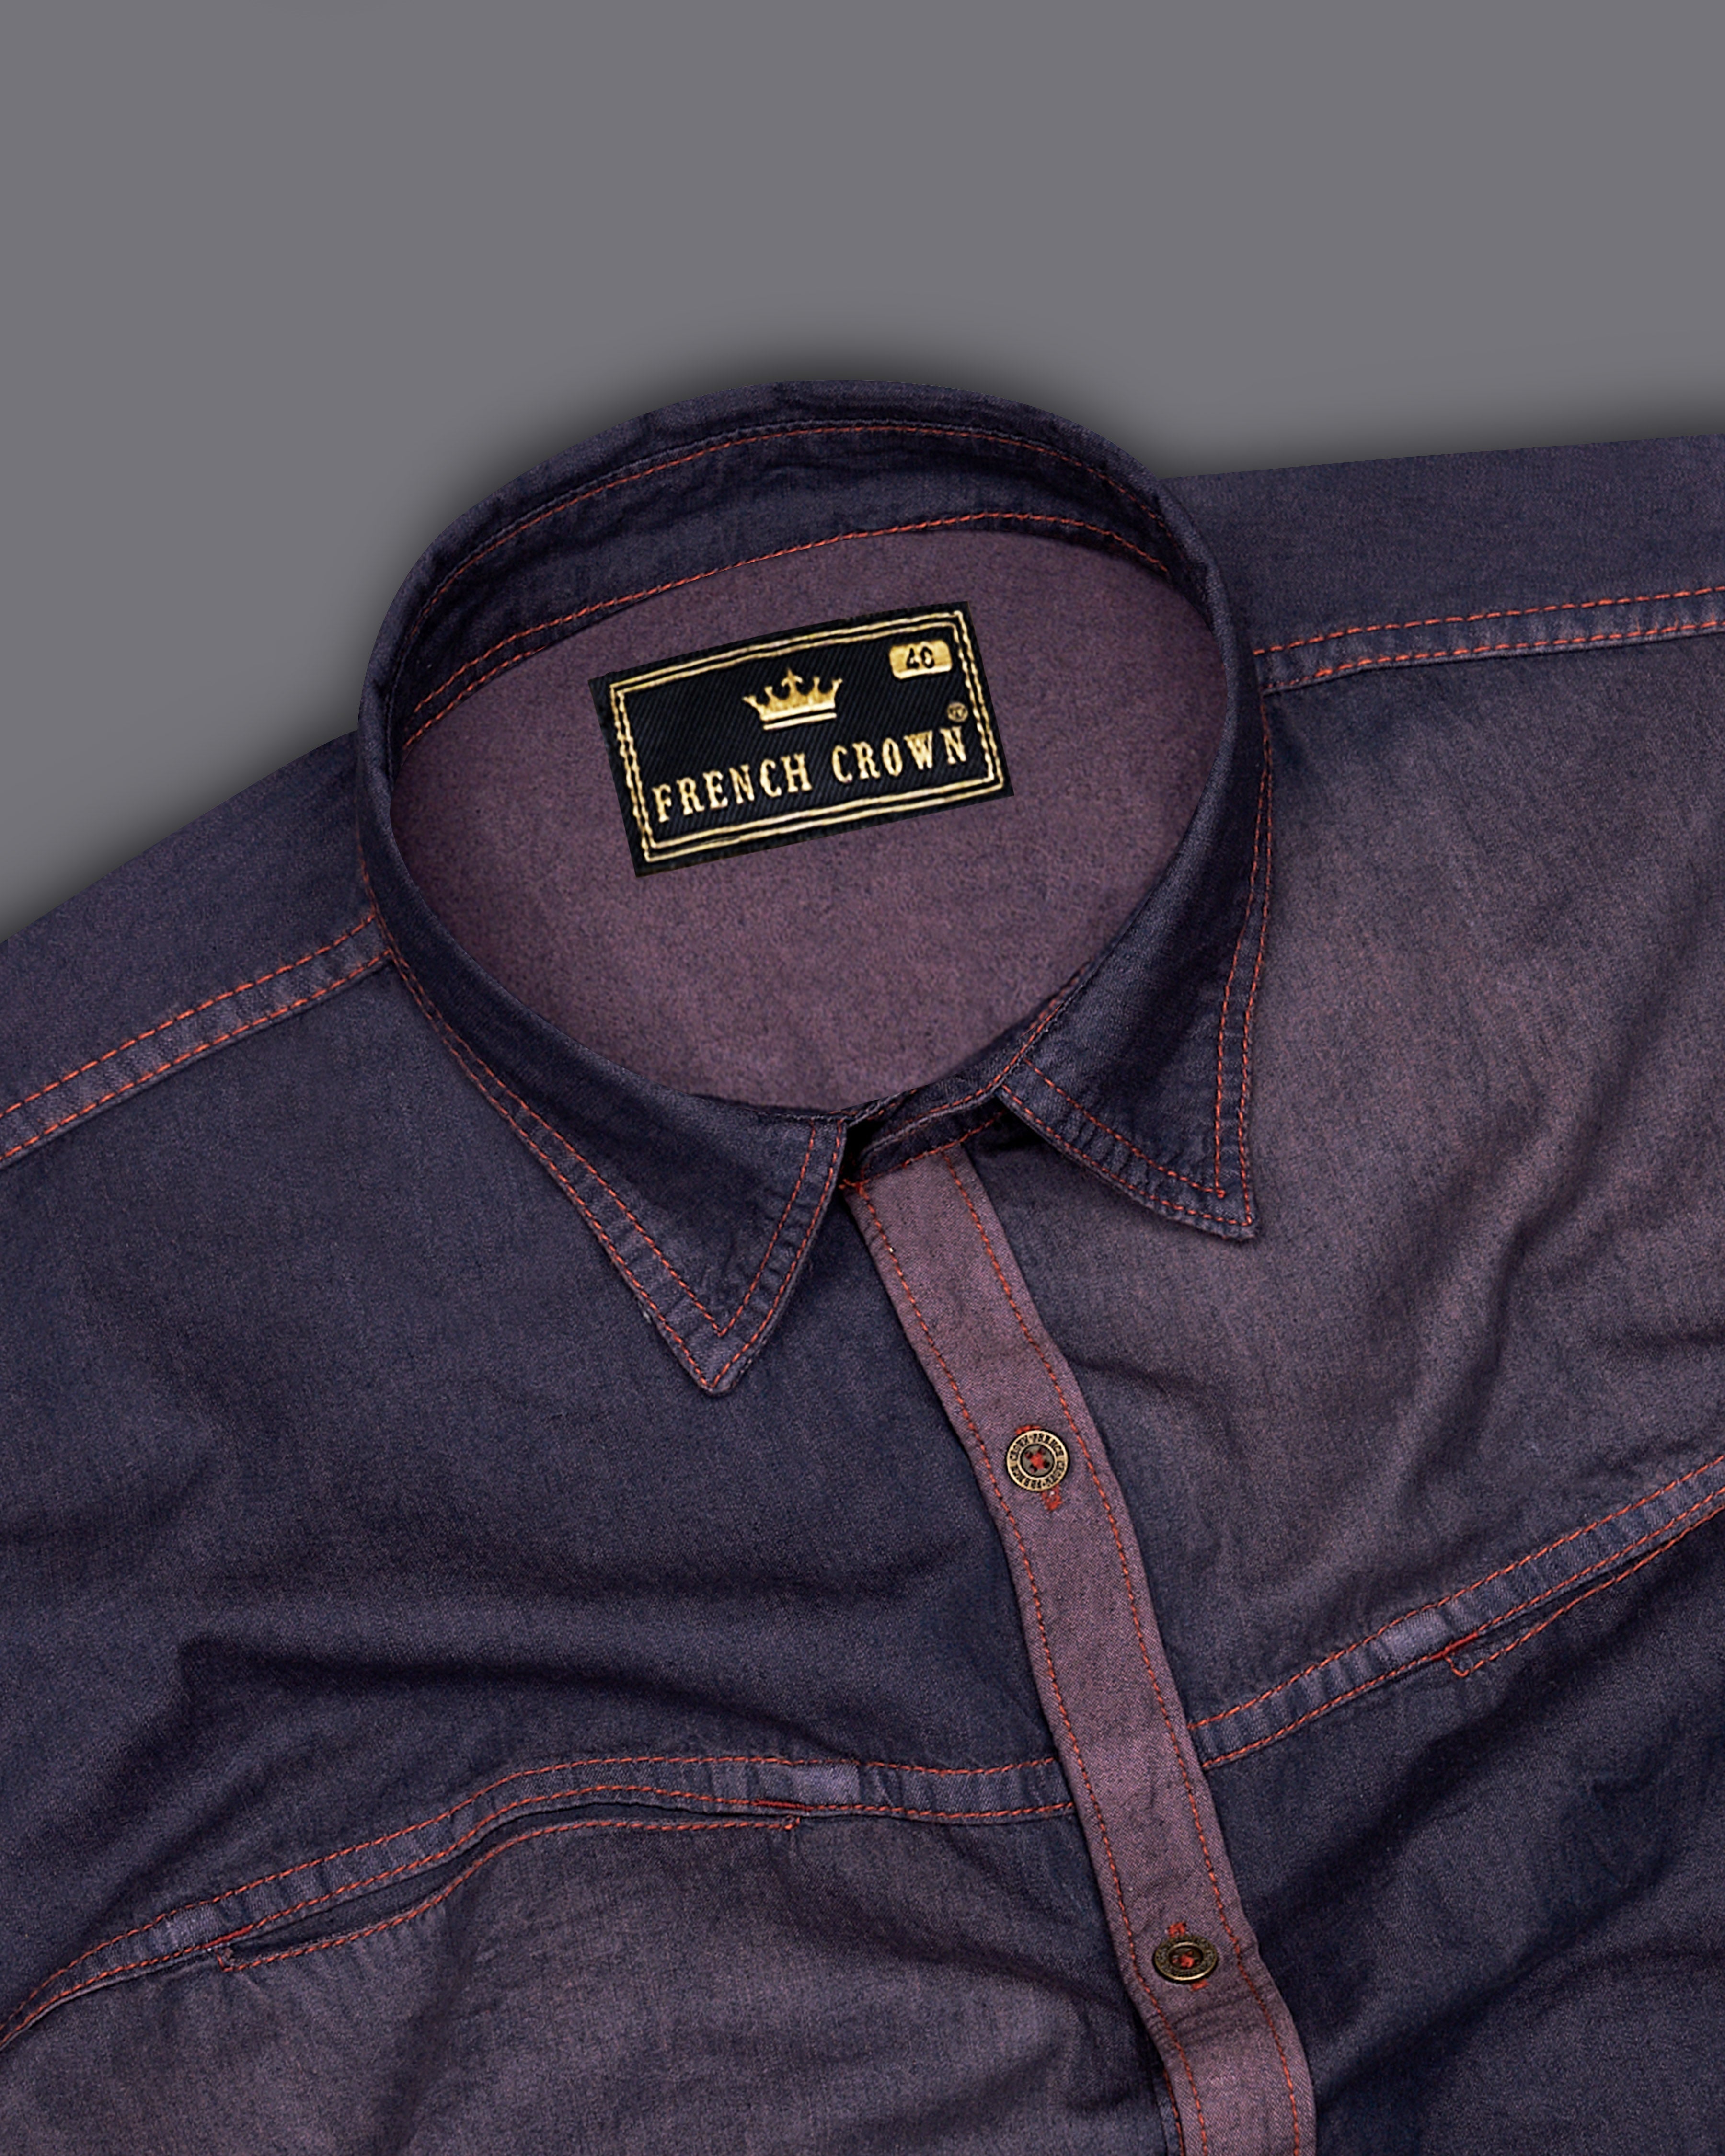 Gravel Purple with Baltic Sea Denim Shirt With Leather Patch Work 9201-MB-38,9201-MB-H-38,9201-MB-39,9201-MB-H-39,9201-MB-40,9201-MB-H-40,9201-MB-42,9201-MB-H-42,9201-MB-44,9201-MB-H-44,9201-MB-46,9201-MB-H-46,9201-MB-48,9201-MB-H-48,9201-MB-50,9201-MB-H-50,9201-MB-52,9201-MB-H-52